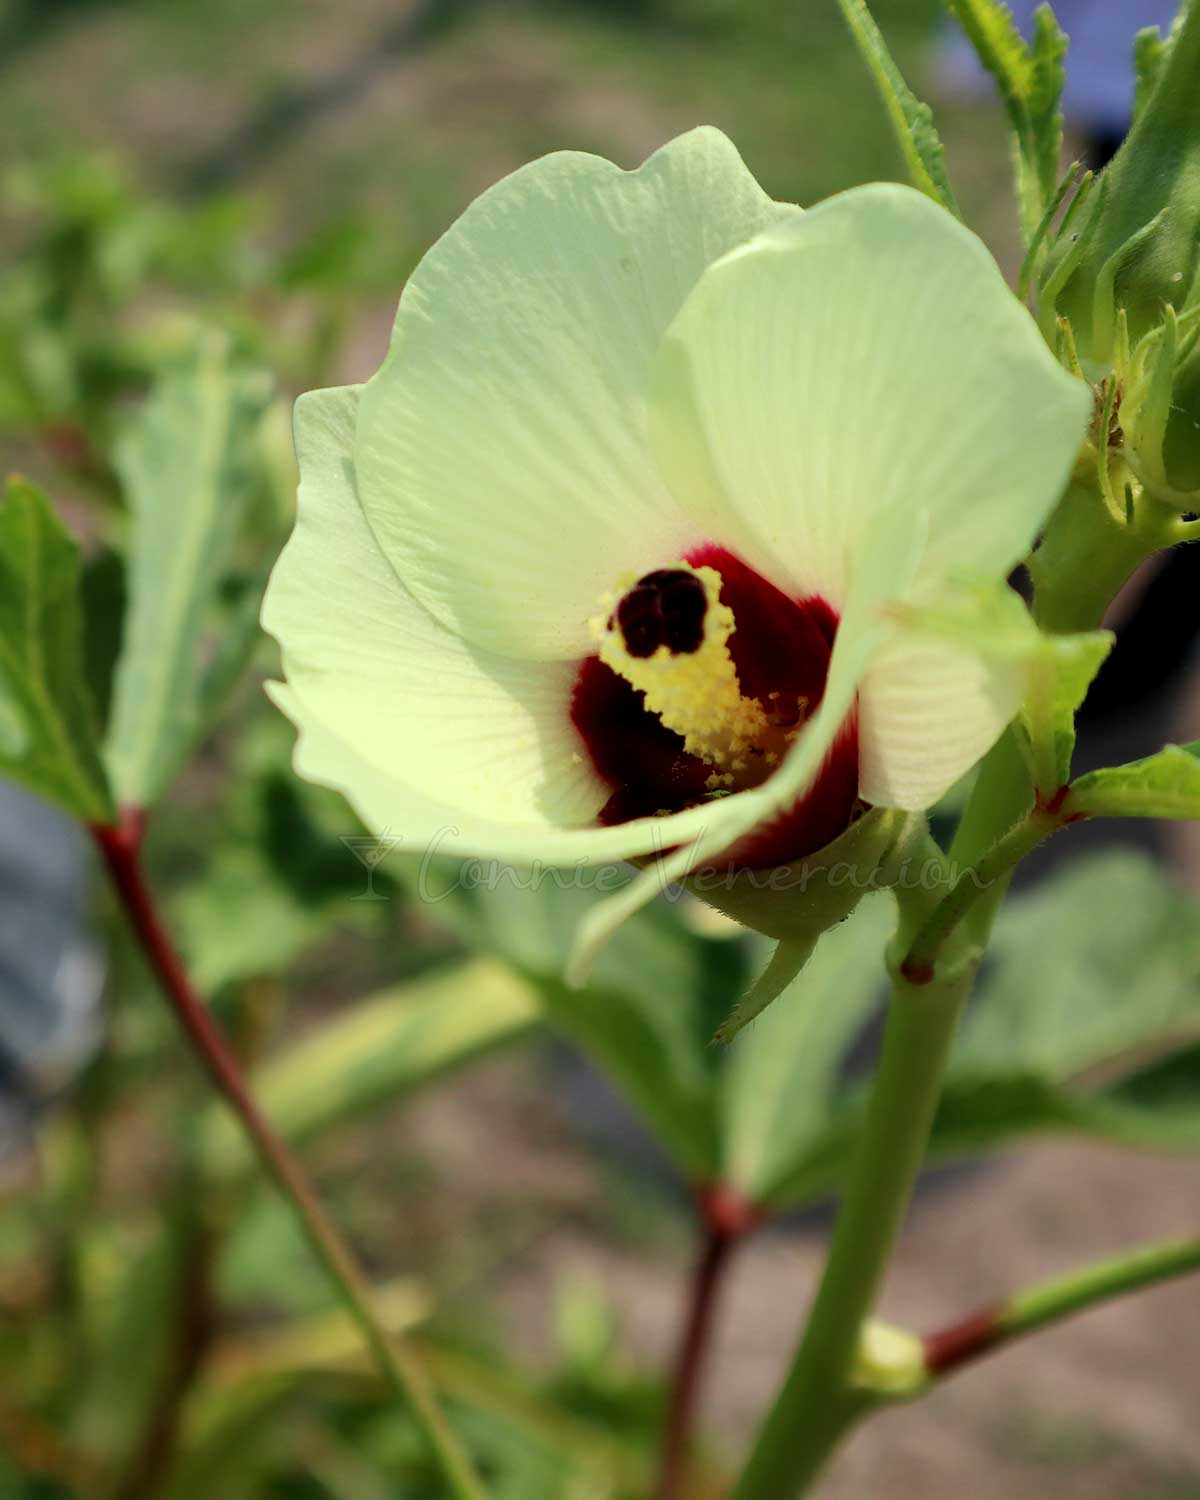 Okra flowers are edible